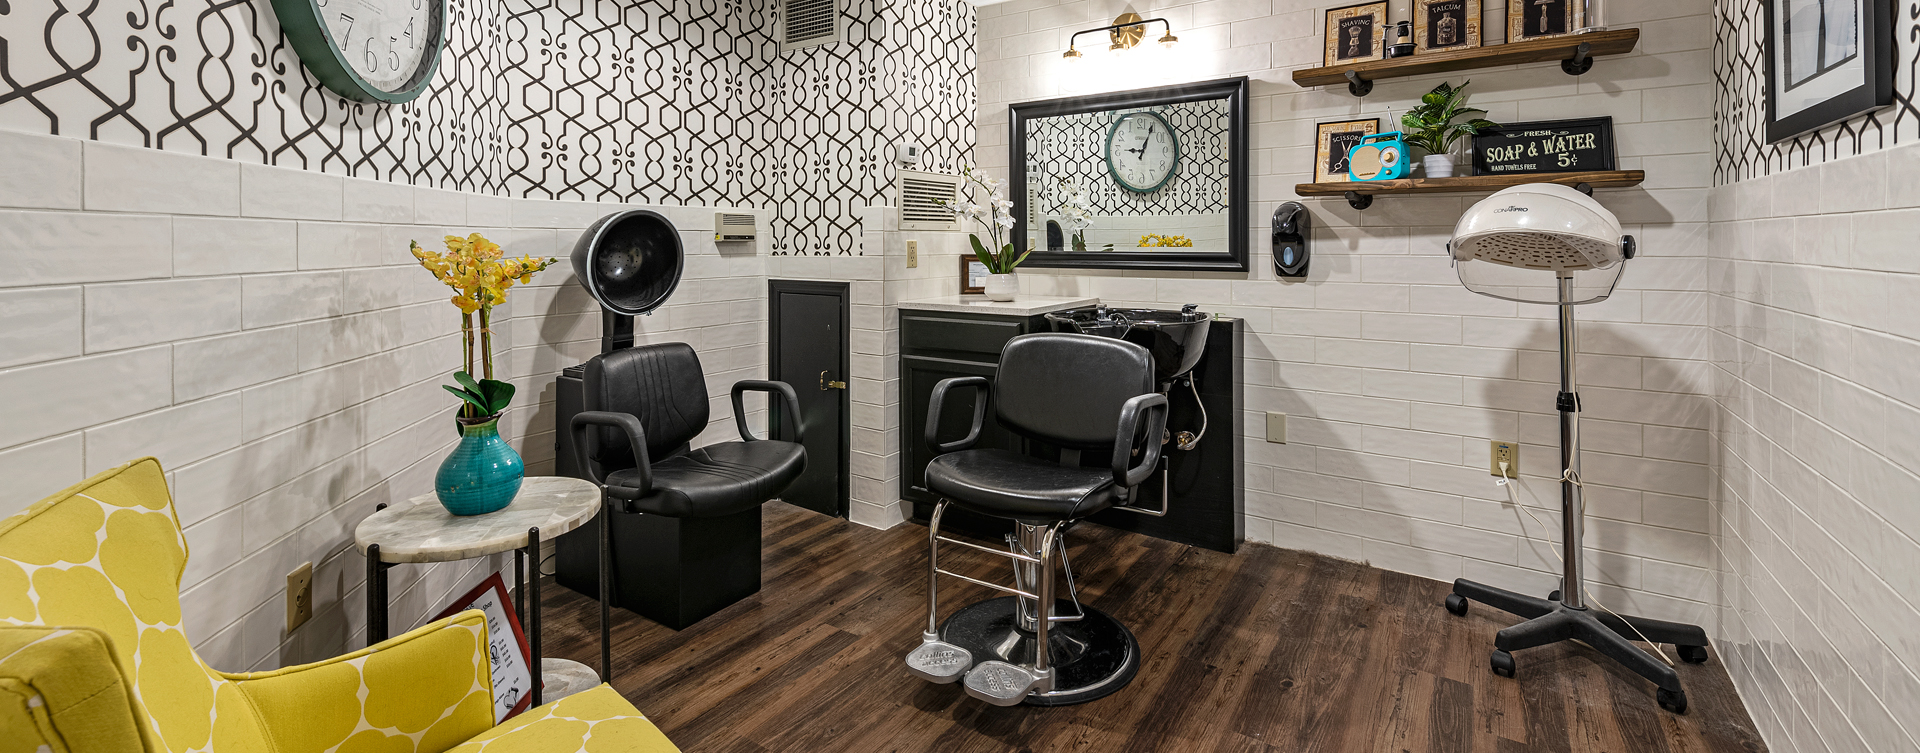 Strut on in and find out what the buzz is all about in the salon at Bickford of Bexley